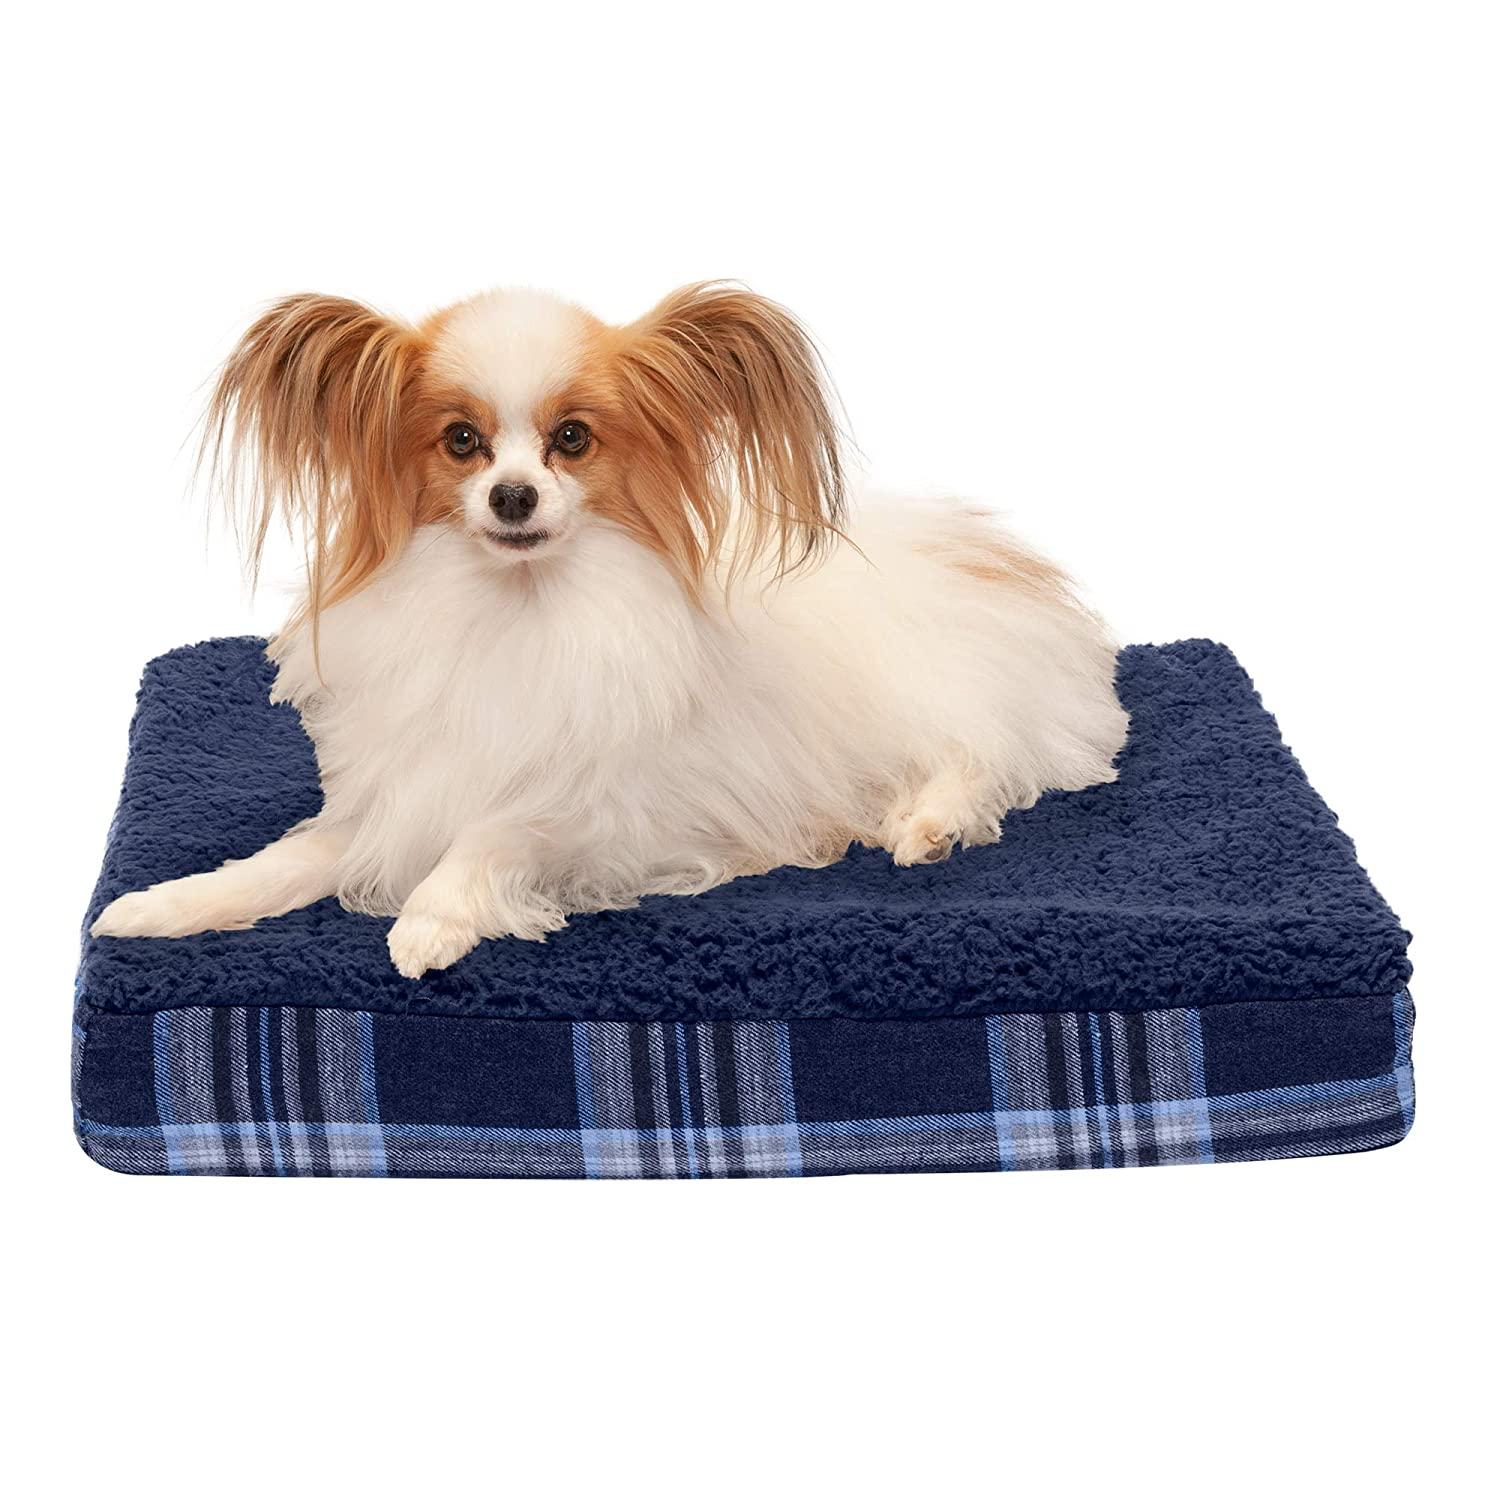 FurHaven Faux Sheepskin & Plaid Deluxe Orthopedic Pet Bed - Midnight Blue